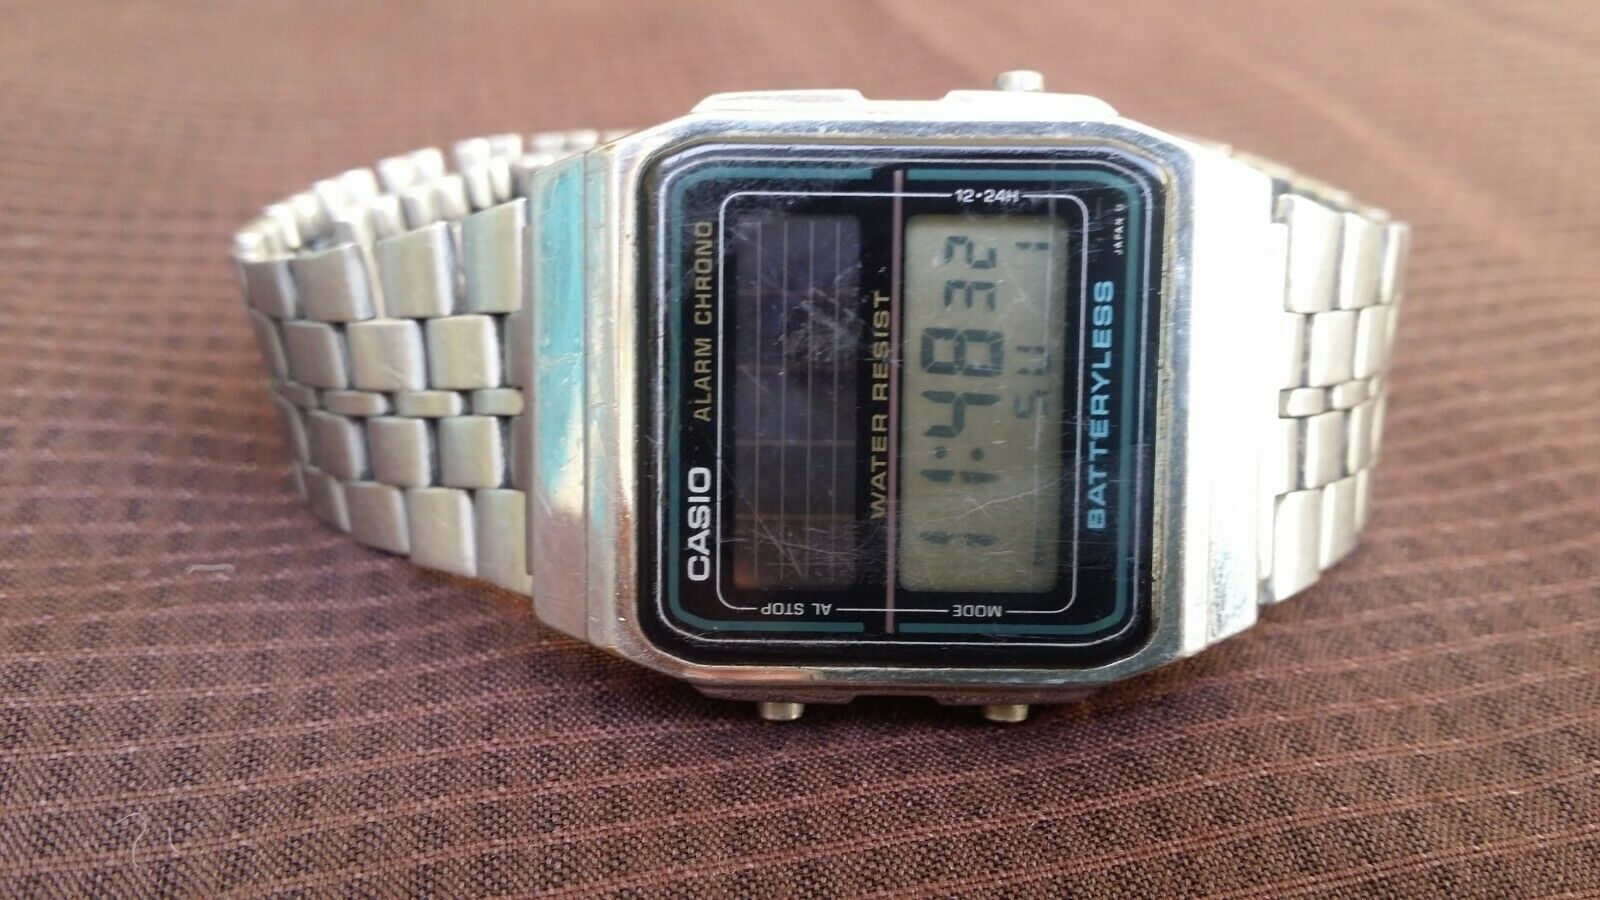 Pin by Patrick Smith on Stewart Costume 1 | Used watches, Wrist watch, Casio